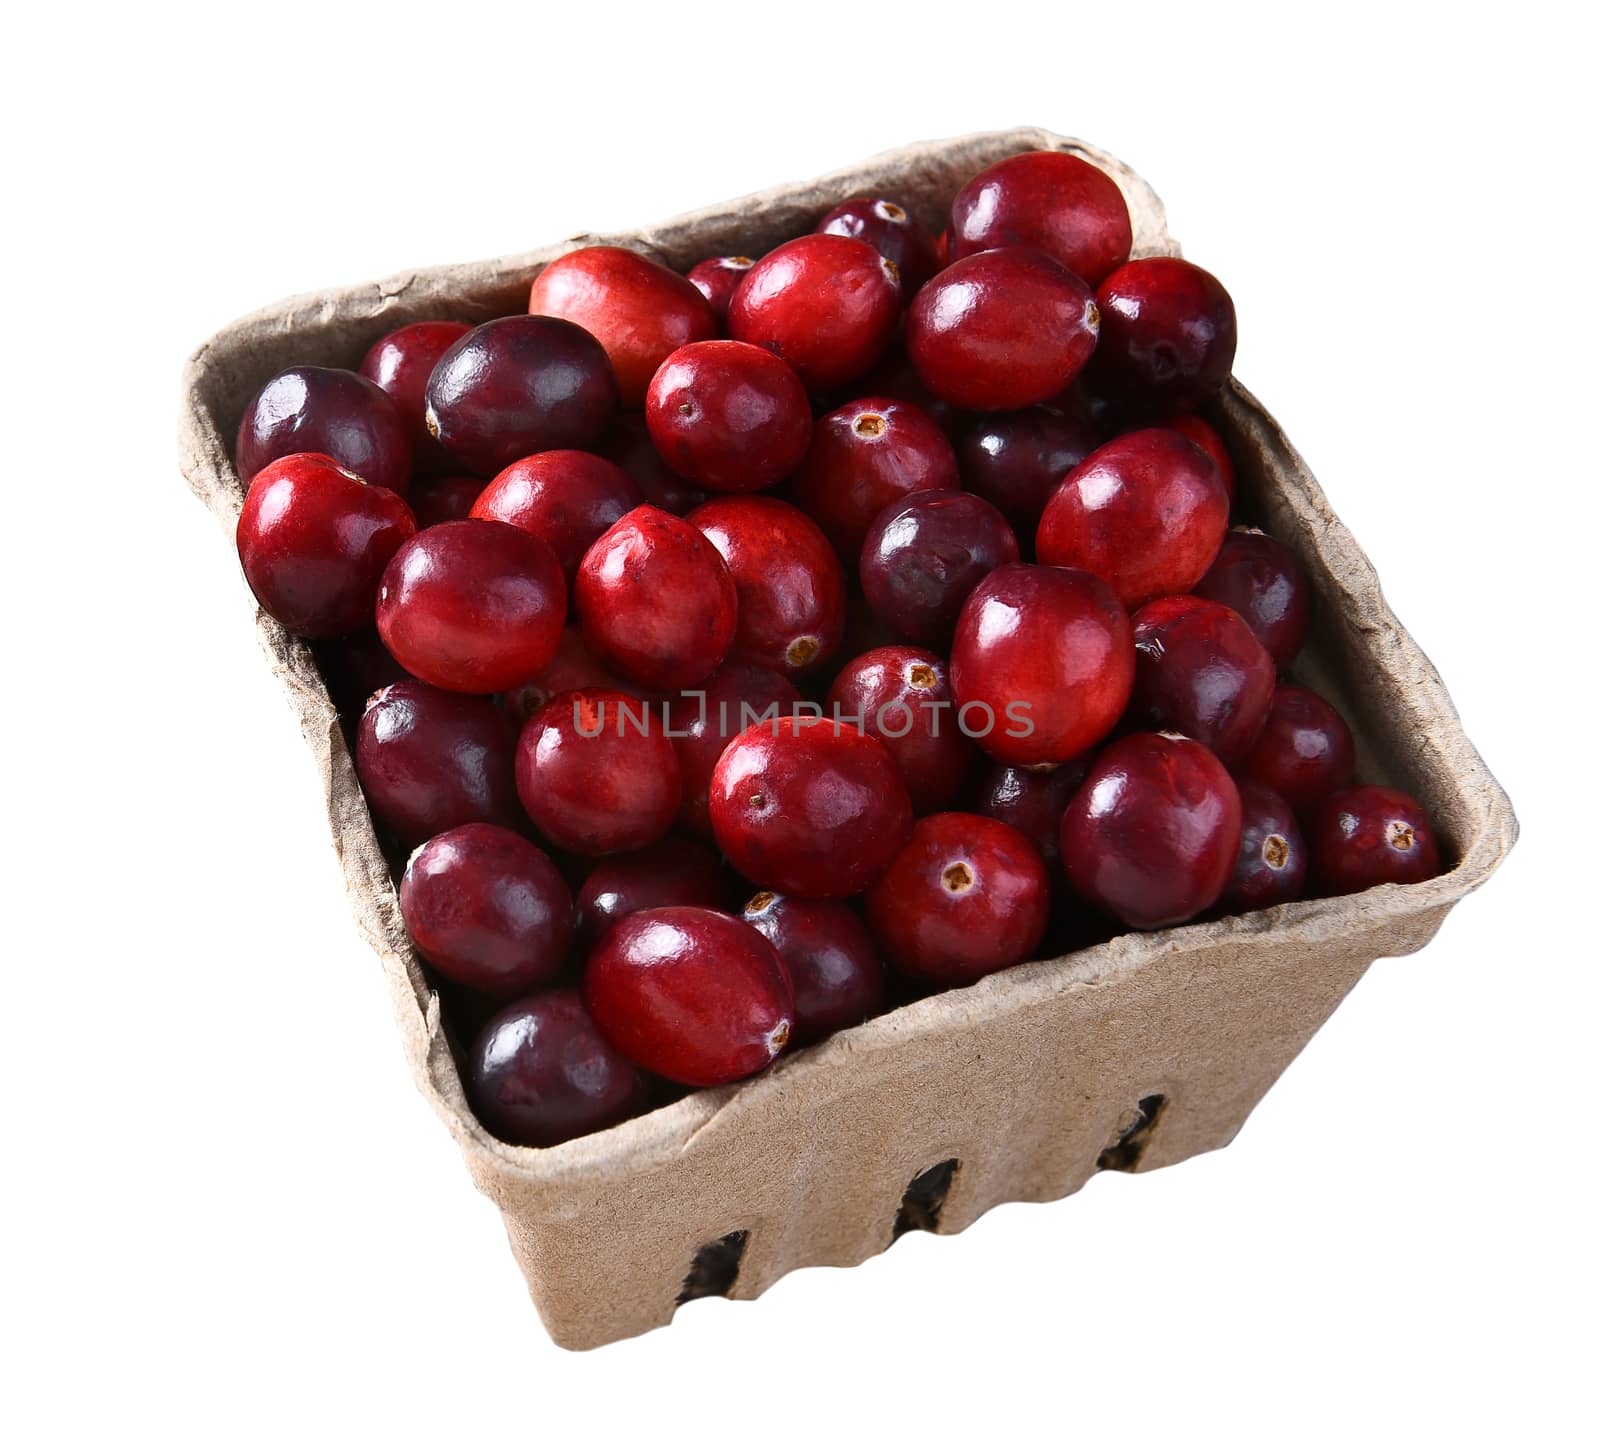 Closeup of a cardboard produce basket of fresh whole cranberries by sCukrov